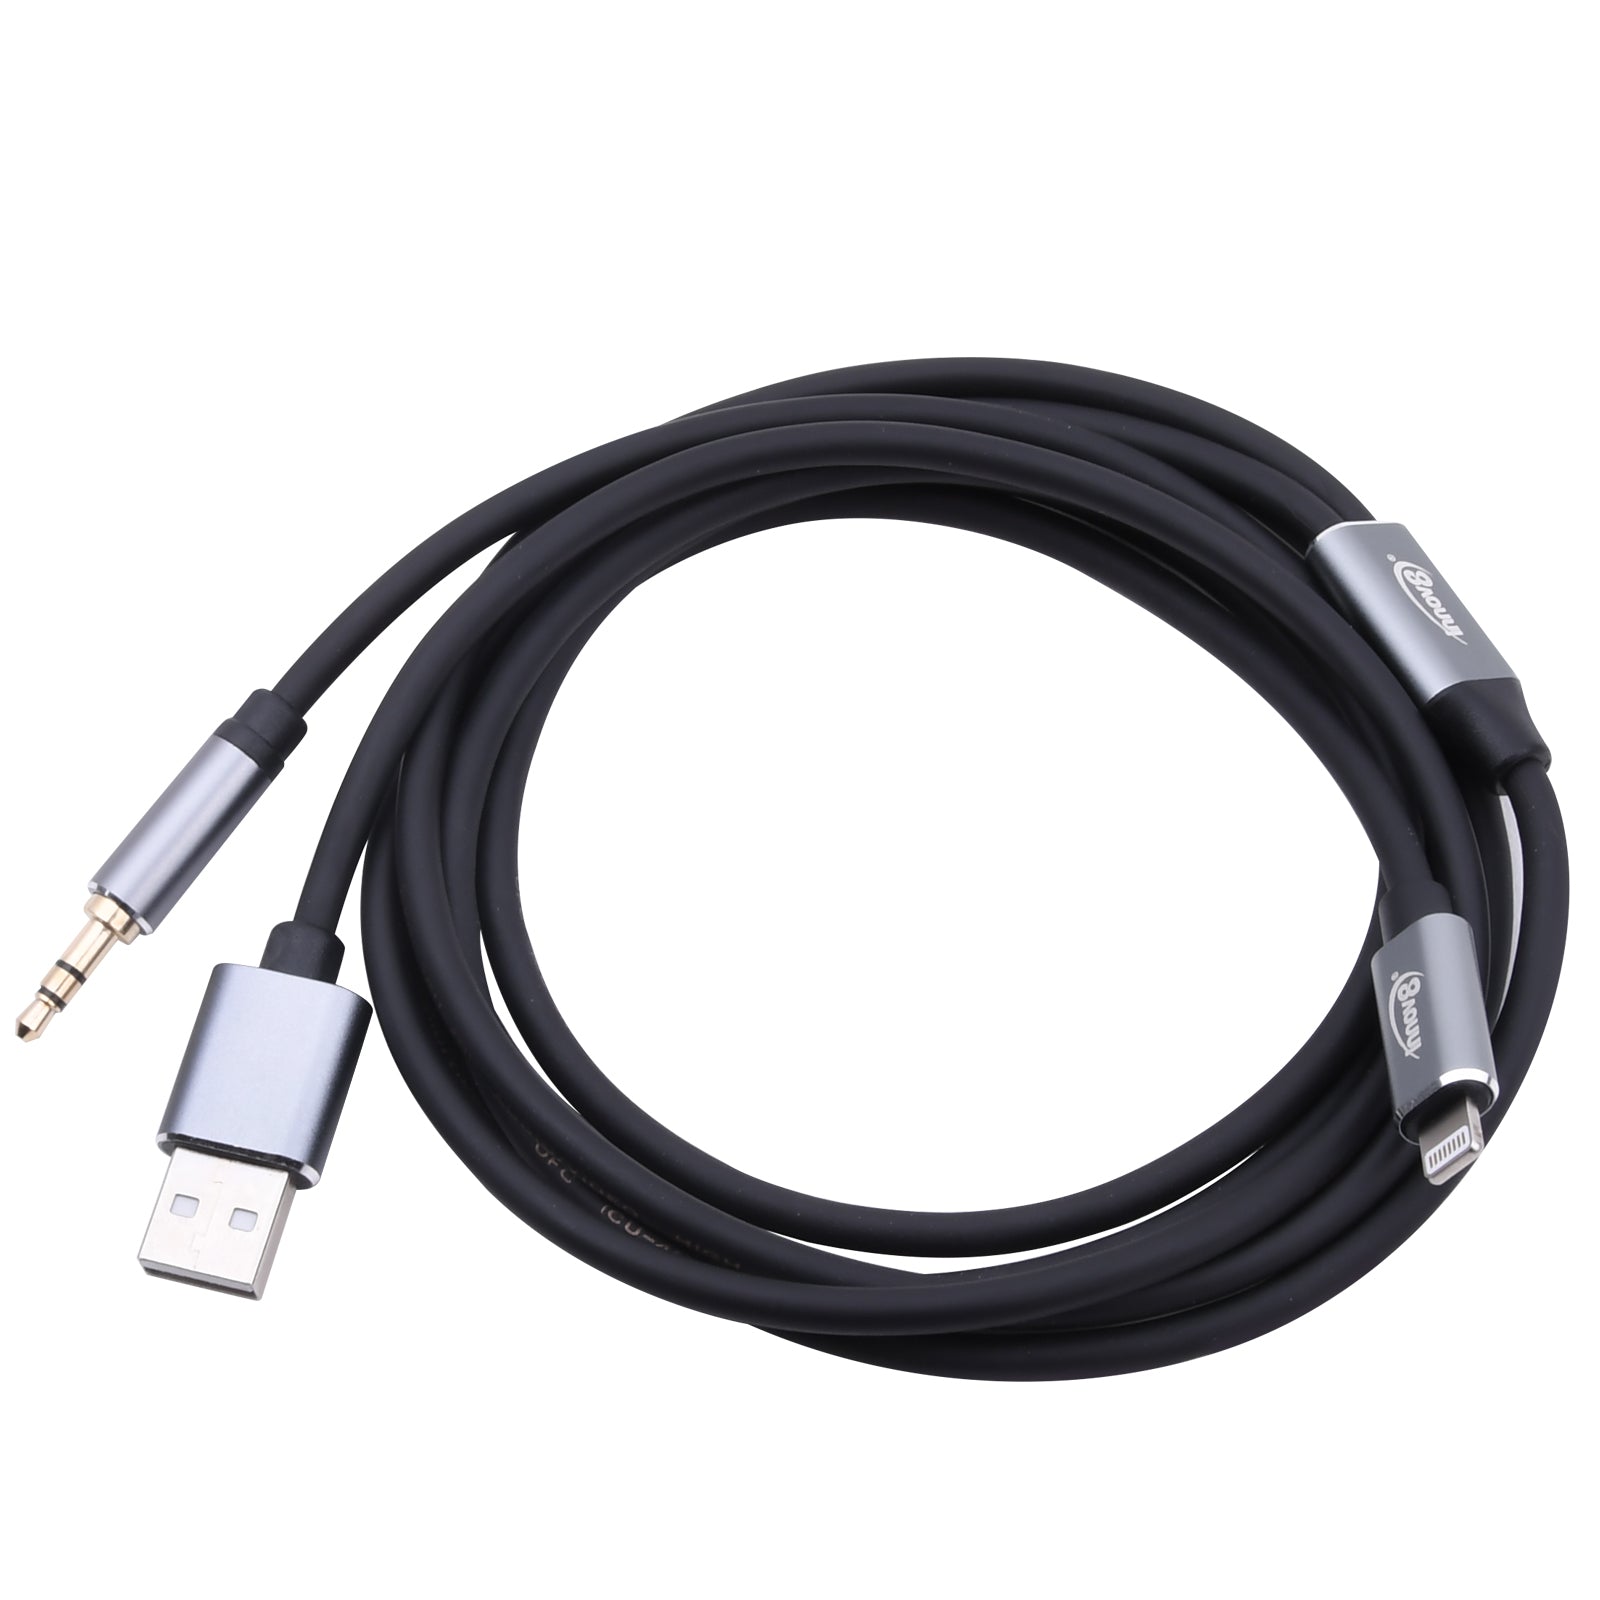 8-Pin to 3.5mm Aux Jack Audio Cable with USB Charge Male for iPhone iPod